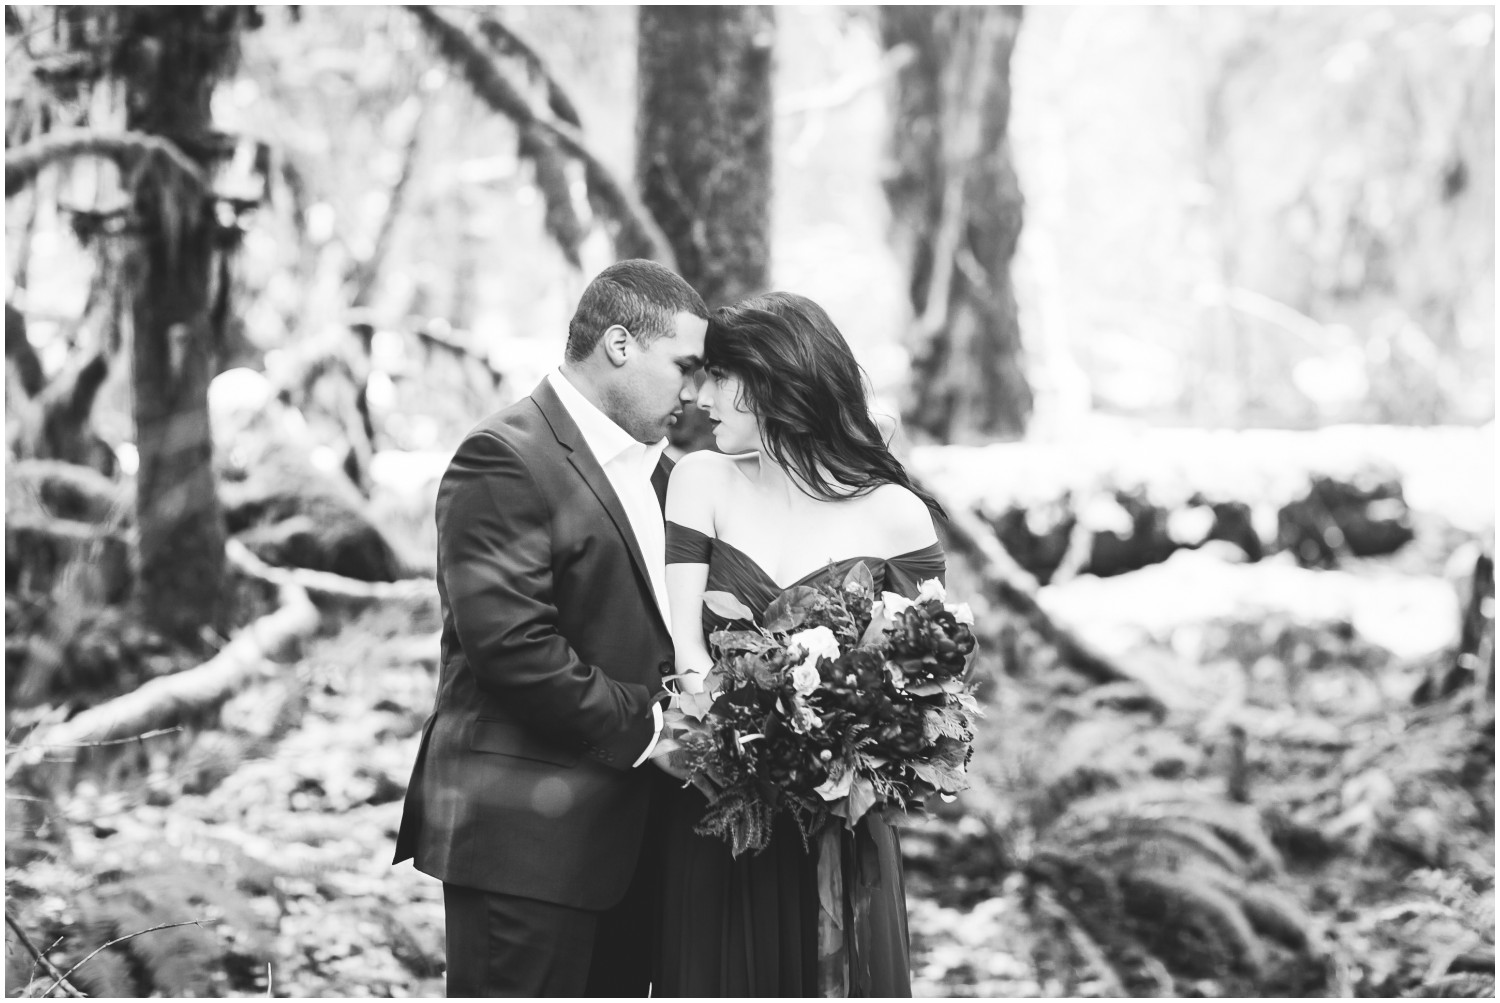 A Mossy Anniversary Session at the Hoh Rainforest